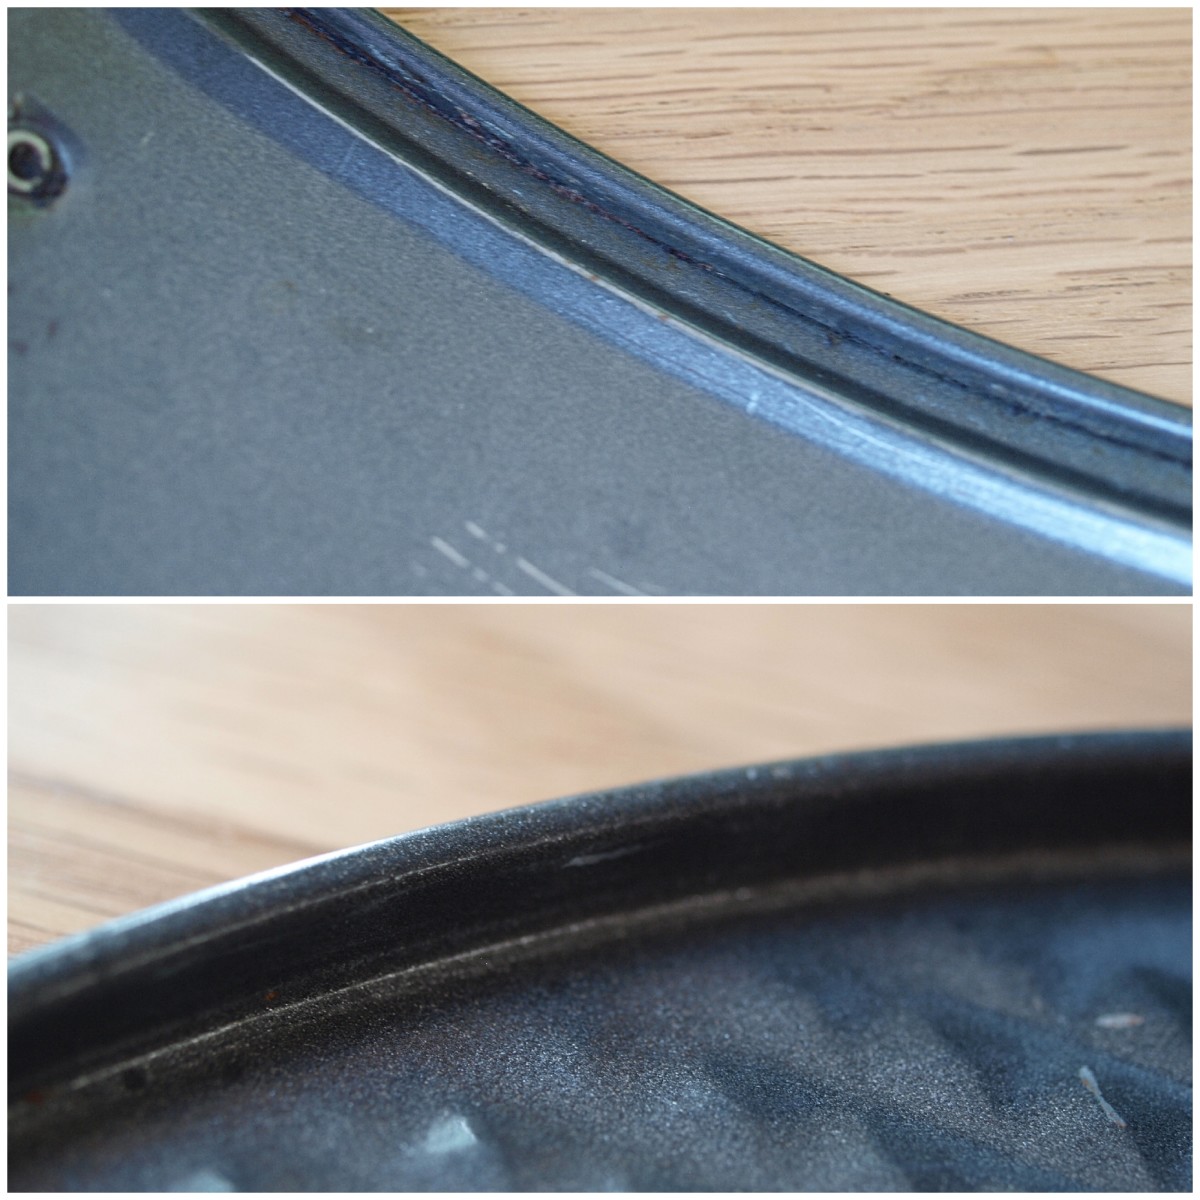 The inside rim of the side and the lip of the bottom of the pan.